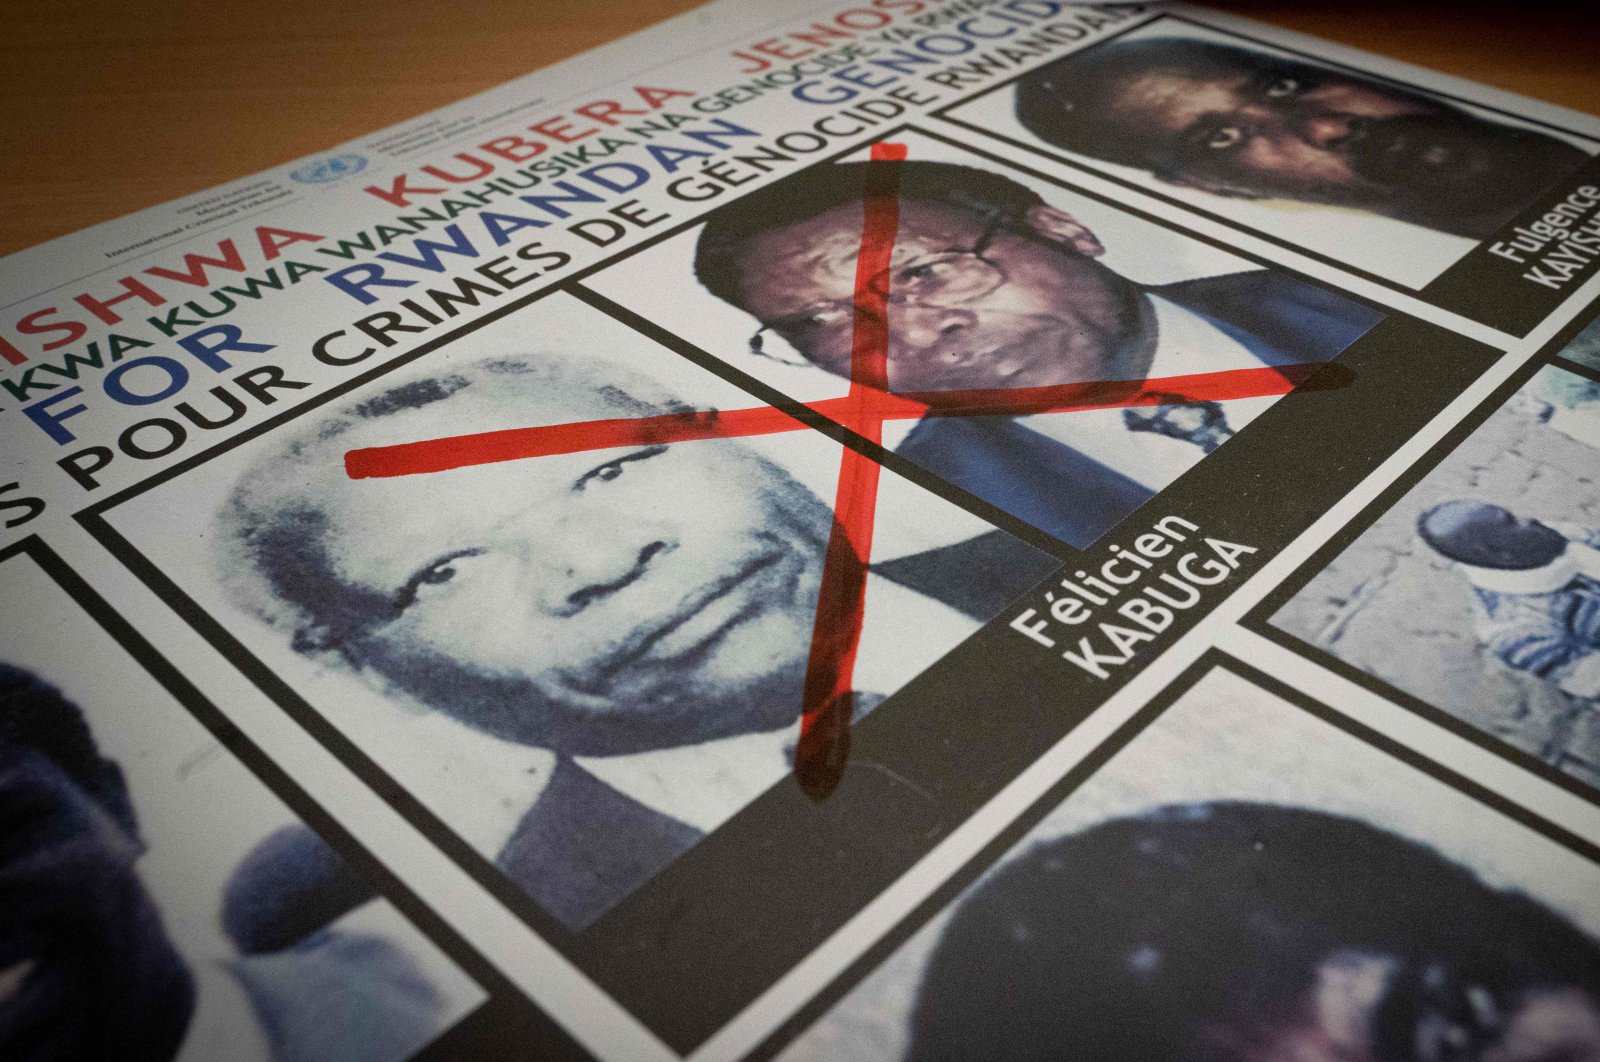 A photo shows a red cross drawn on the face of Felicien Kabuga, one of the last key suspects in the 1994 Rwandan genocide, on a wanted poster at the Genocide Fugitive Tracking Unit office in Kigali, Rwanda, May 19, 2020. (AFP Photo)